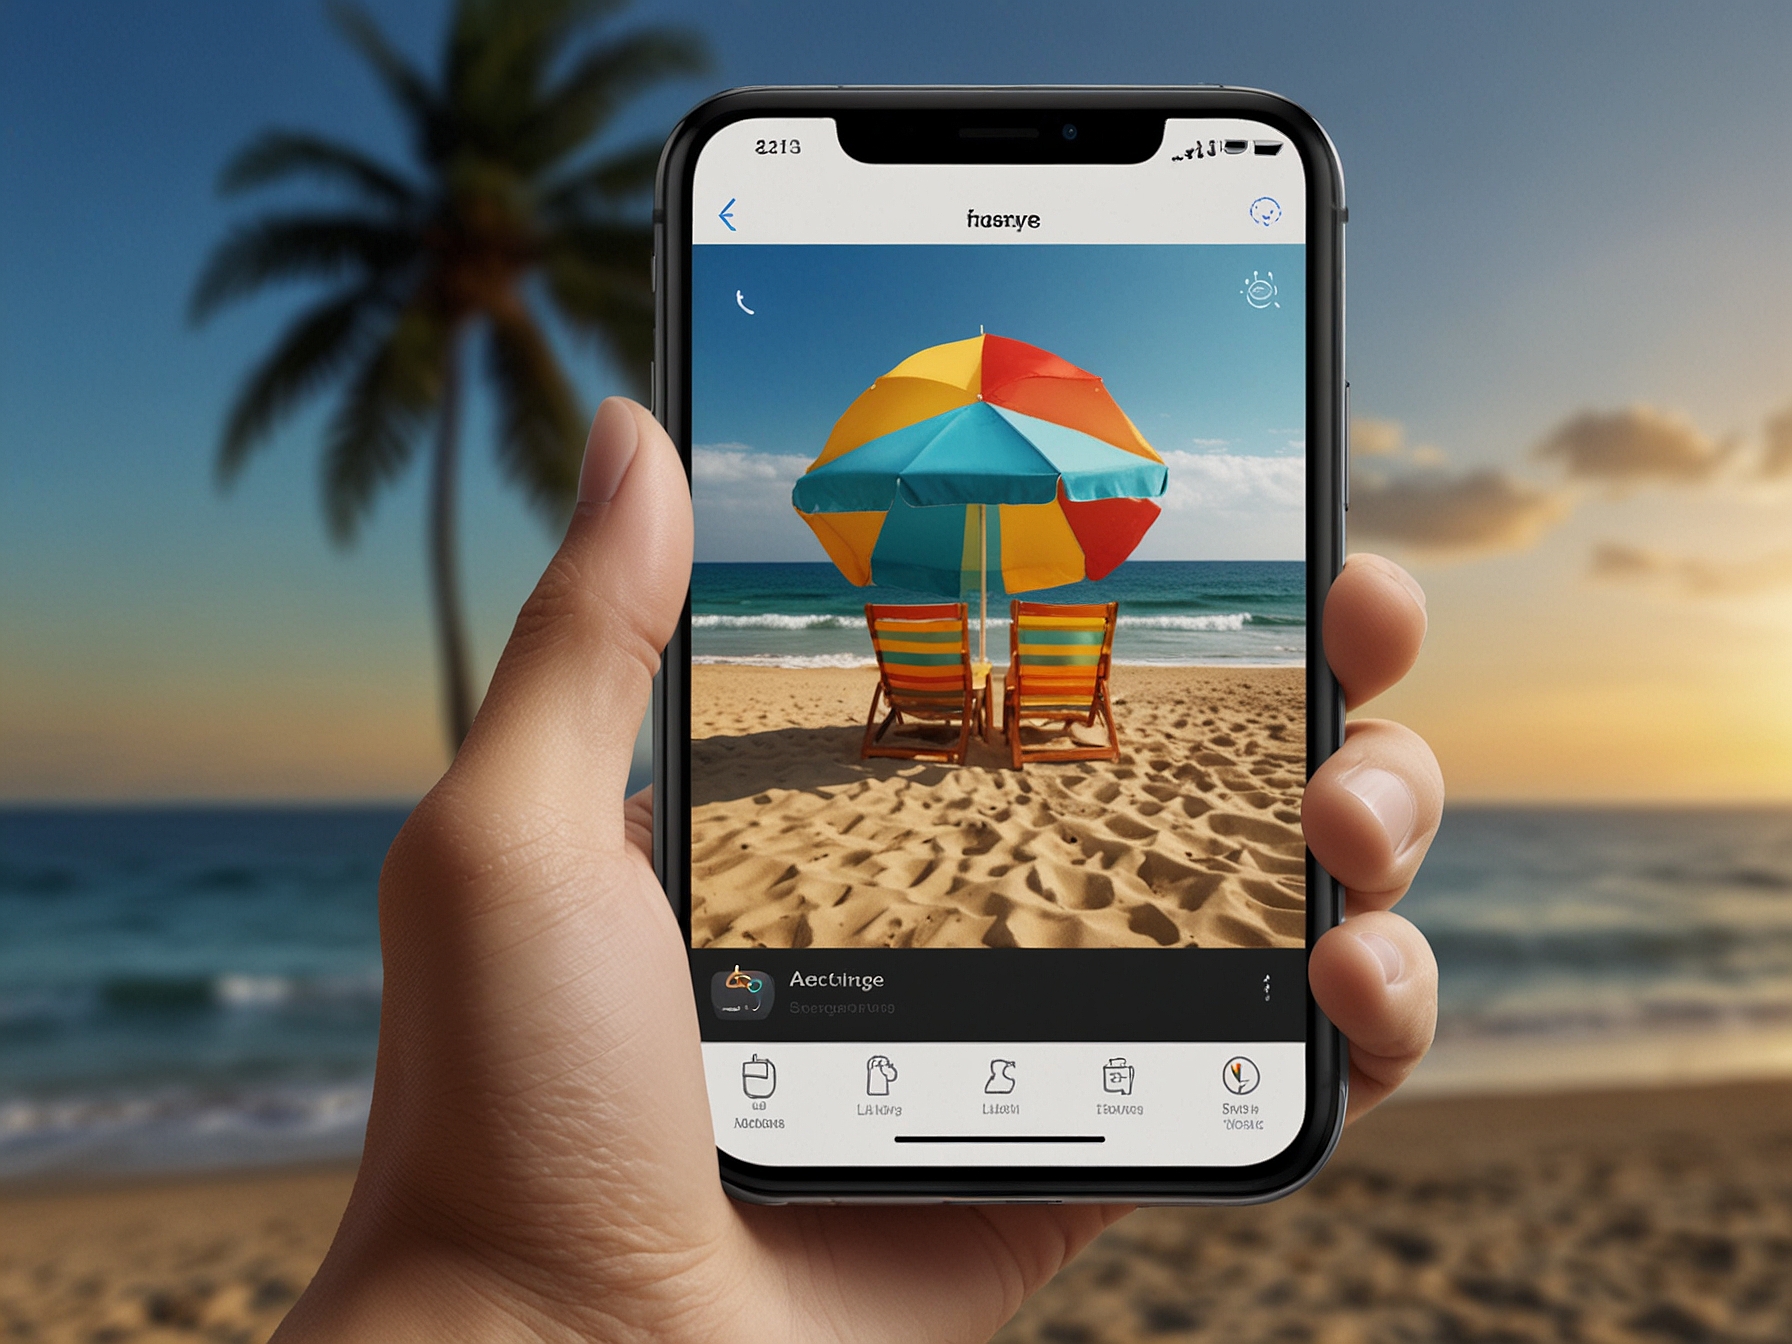 The Photos app on an iPhone, highlighting its advanced search capabilities using machine learning to find photos based on keywords like 'beach' or 'birthday'.